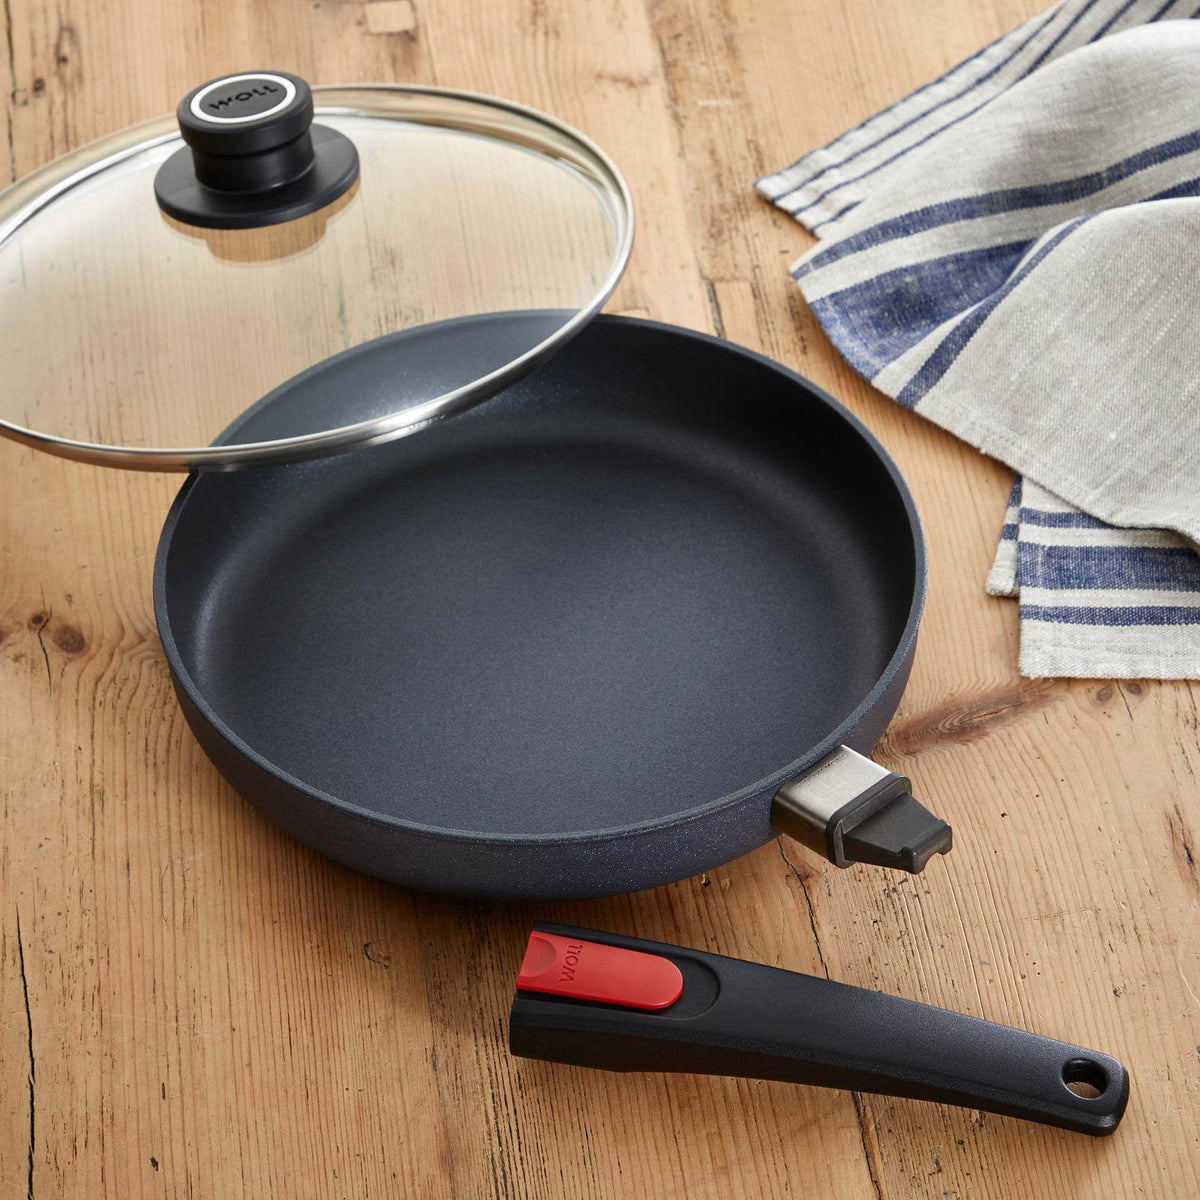 The best shallow frying pan  set for use with range cookers. Oven &amp; dishwasher safe!